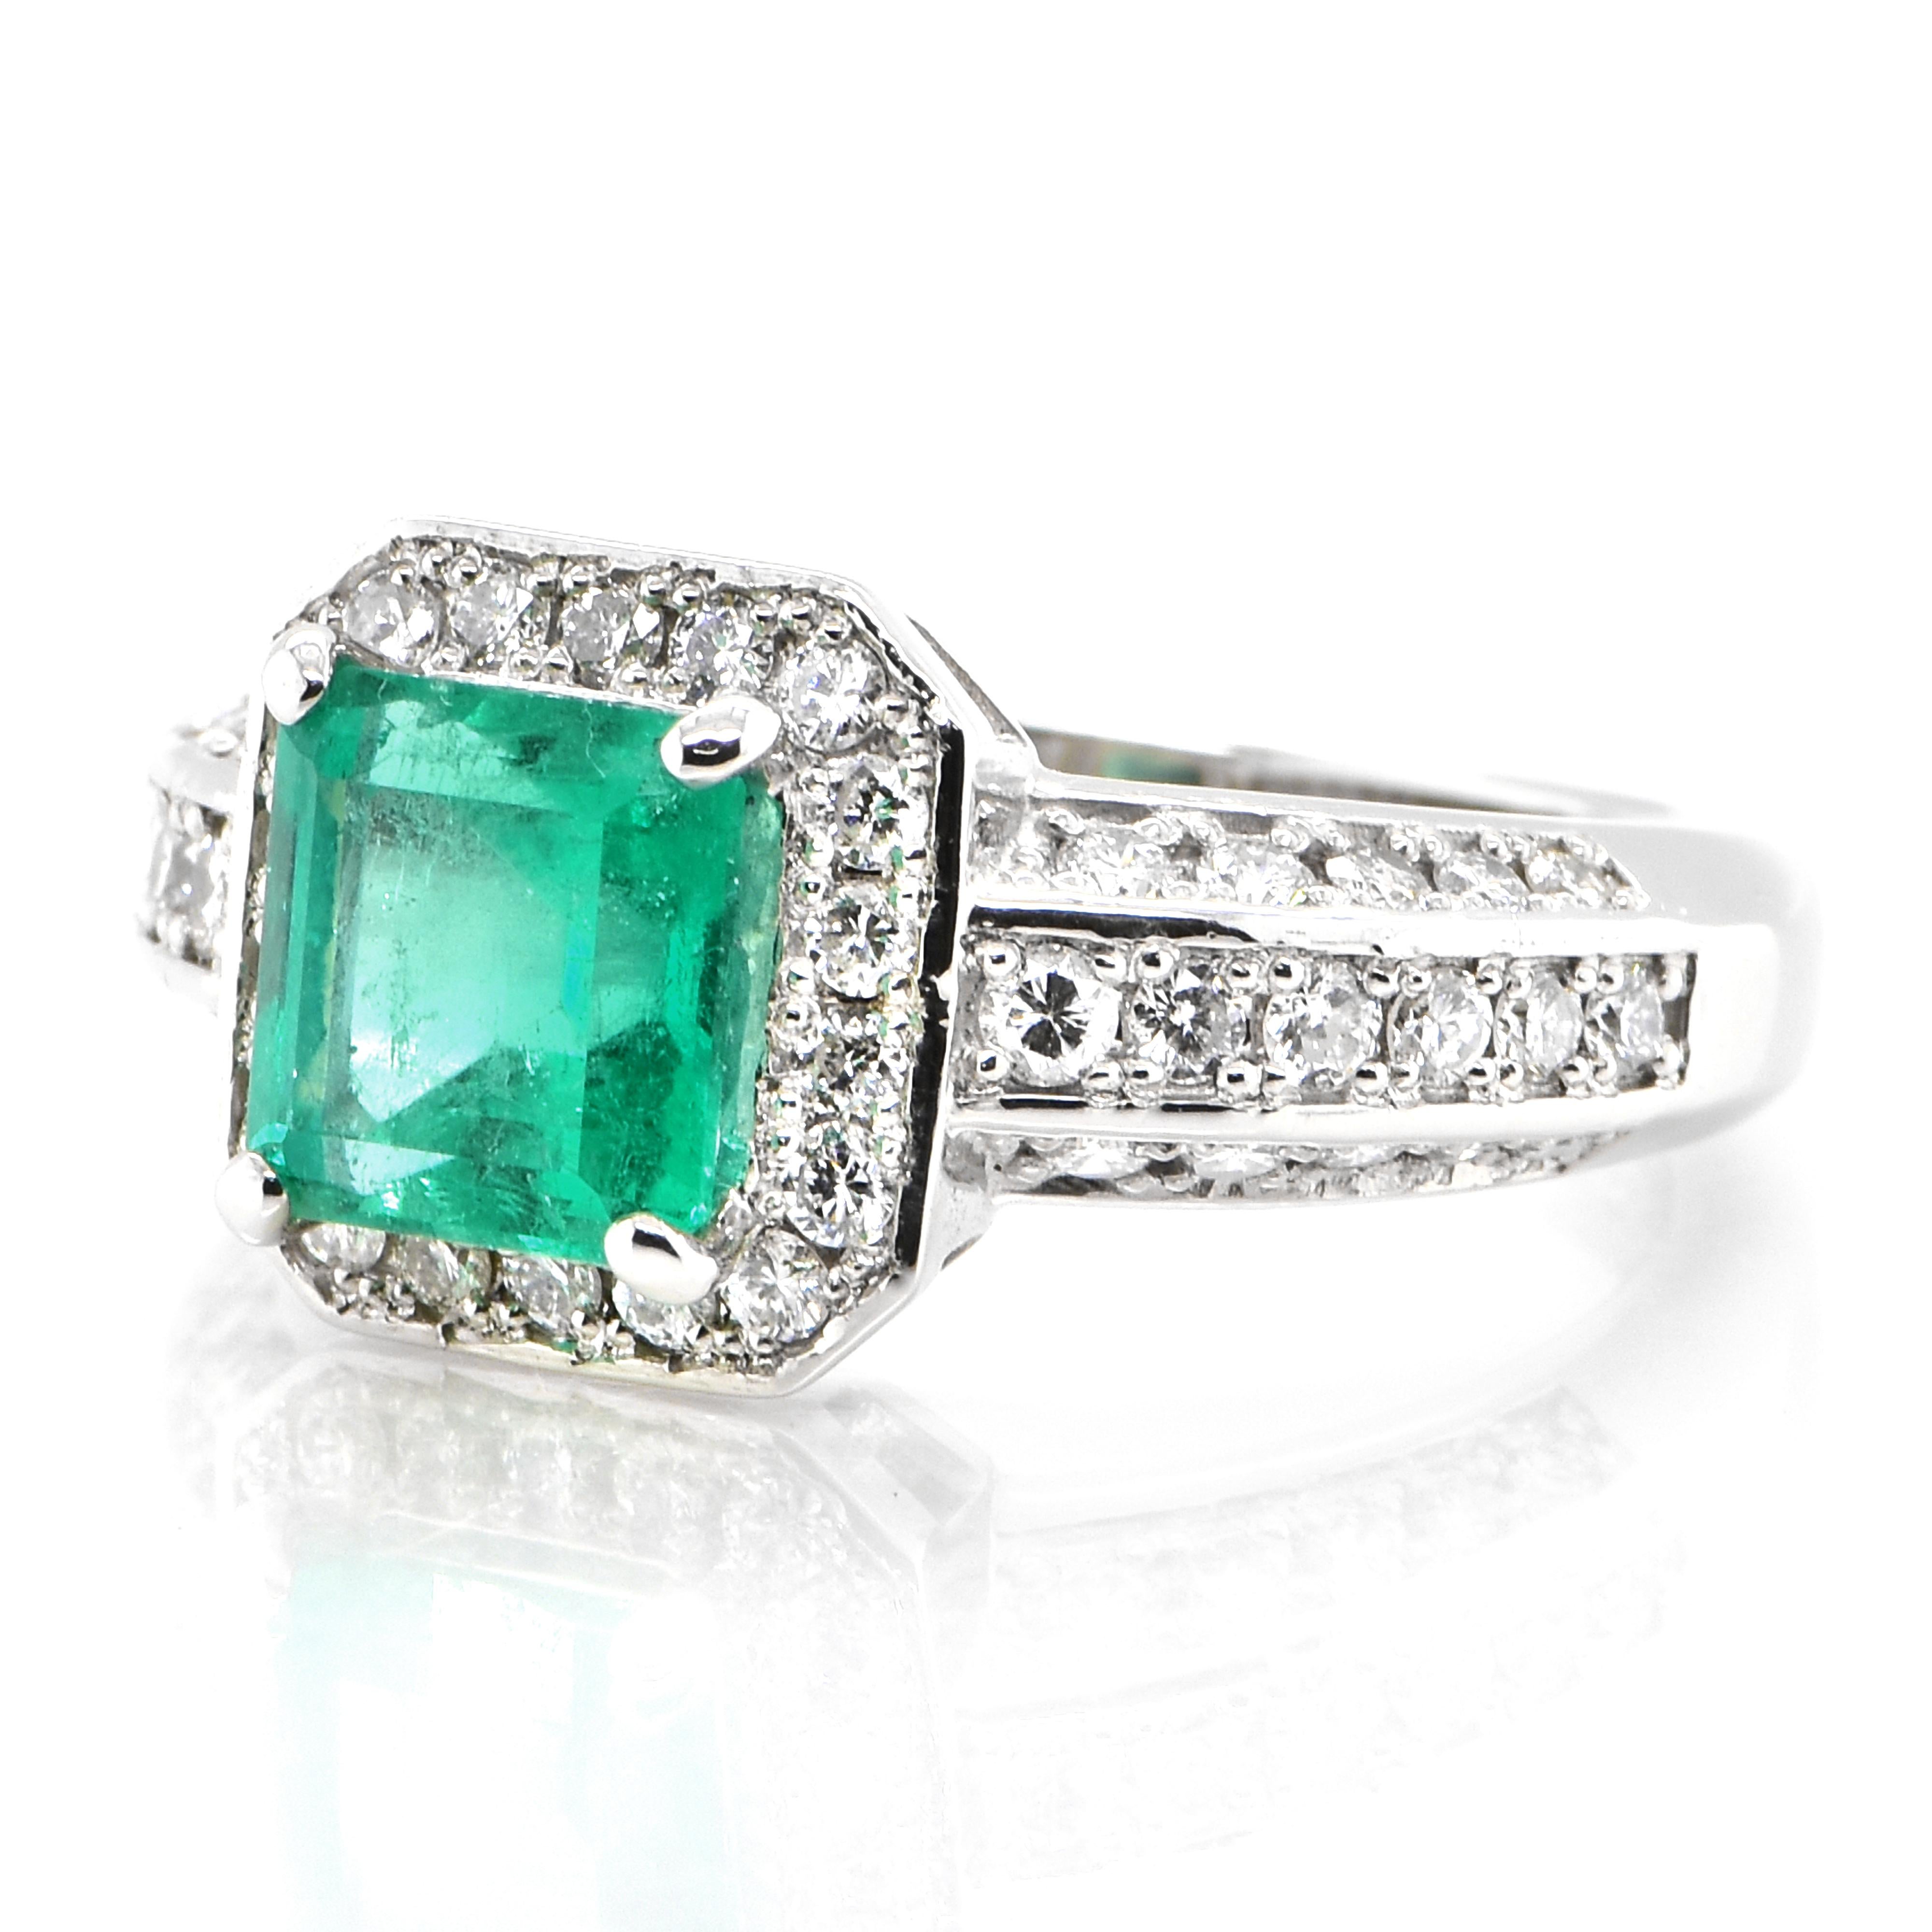 A stunning ring featuring a 1.584 Carat Natural Emerald and 0.72 Carats of Diamond Accents set in Platinum. People have admired emerald’s green for thousands of years. Emeralds have always been associated with the lushest landscapes and the richest